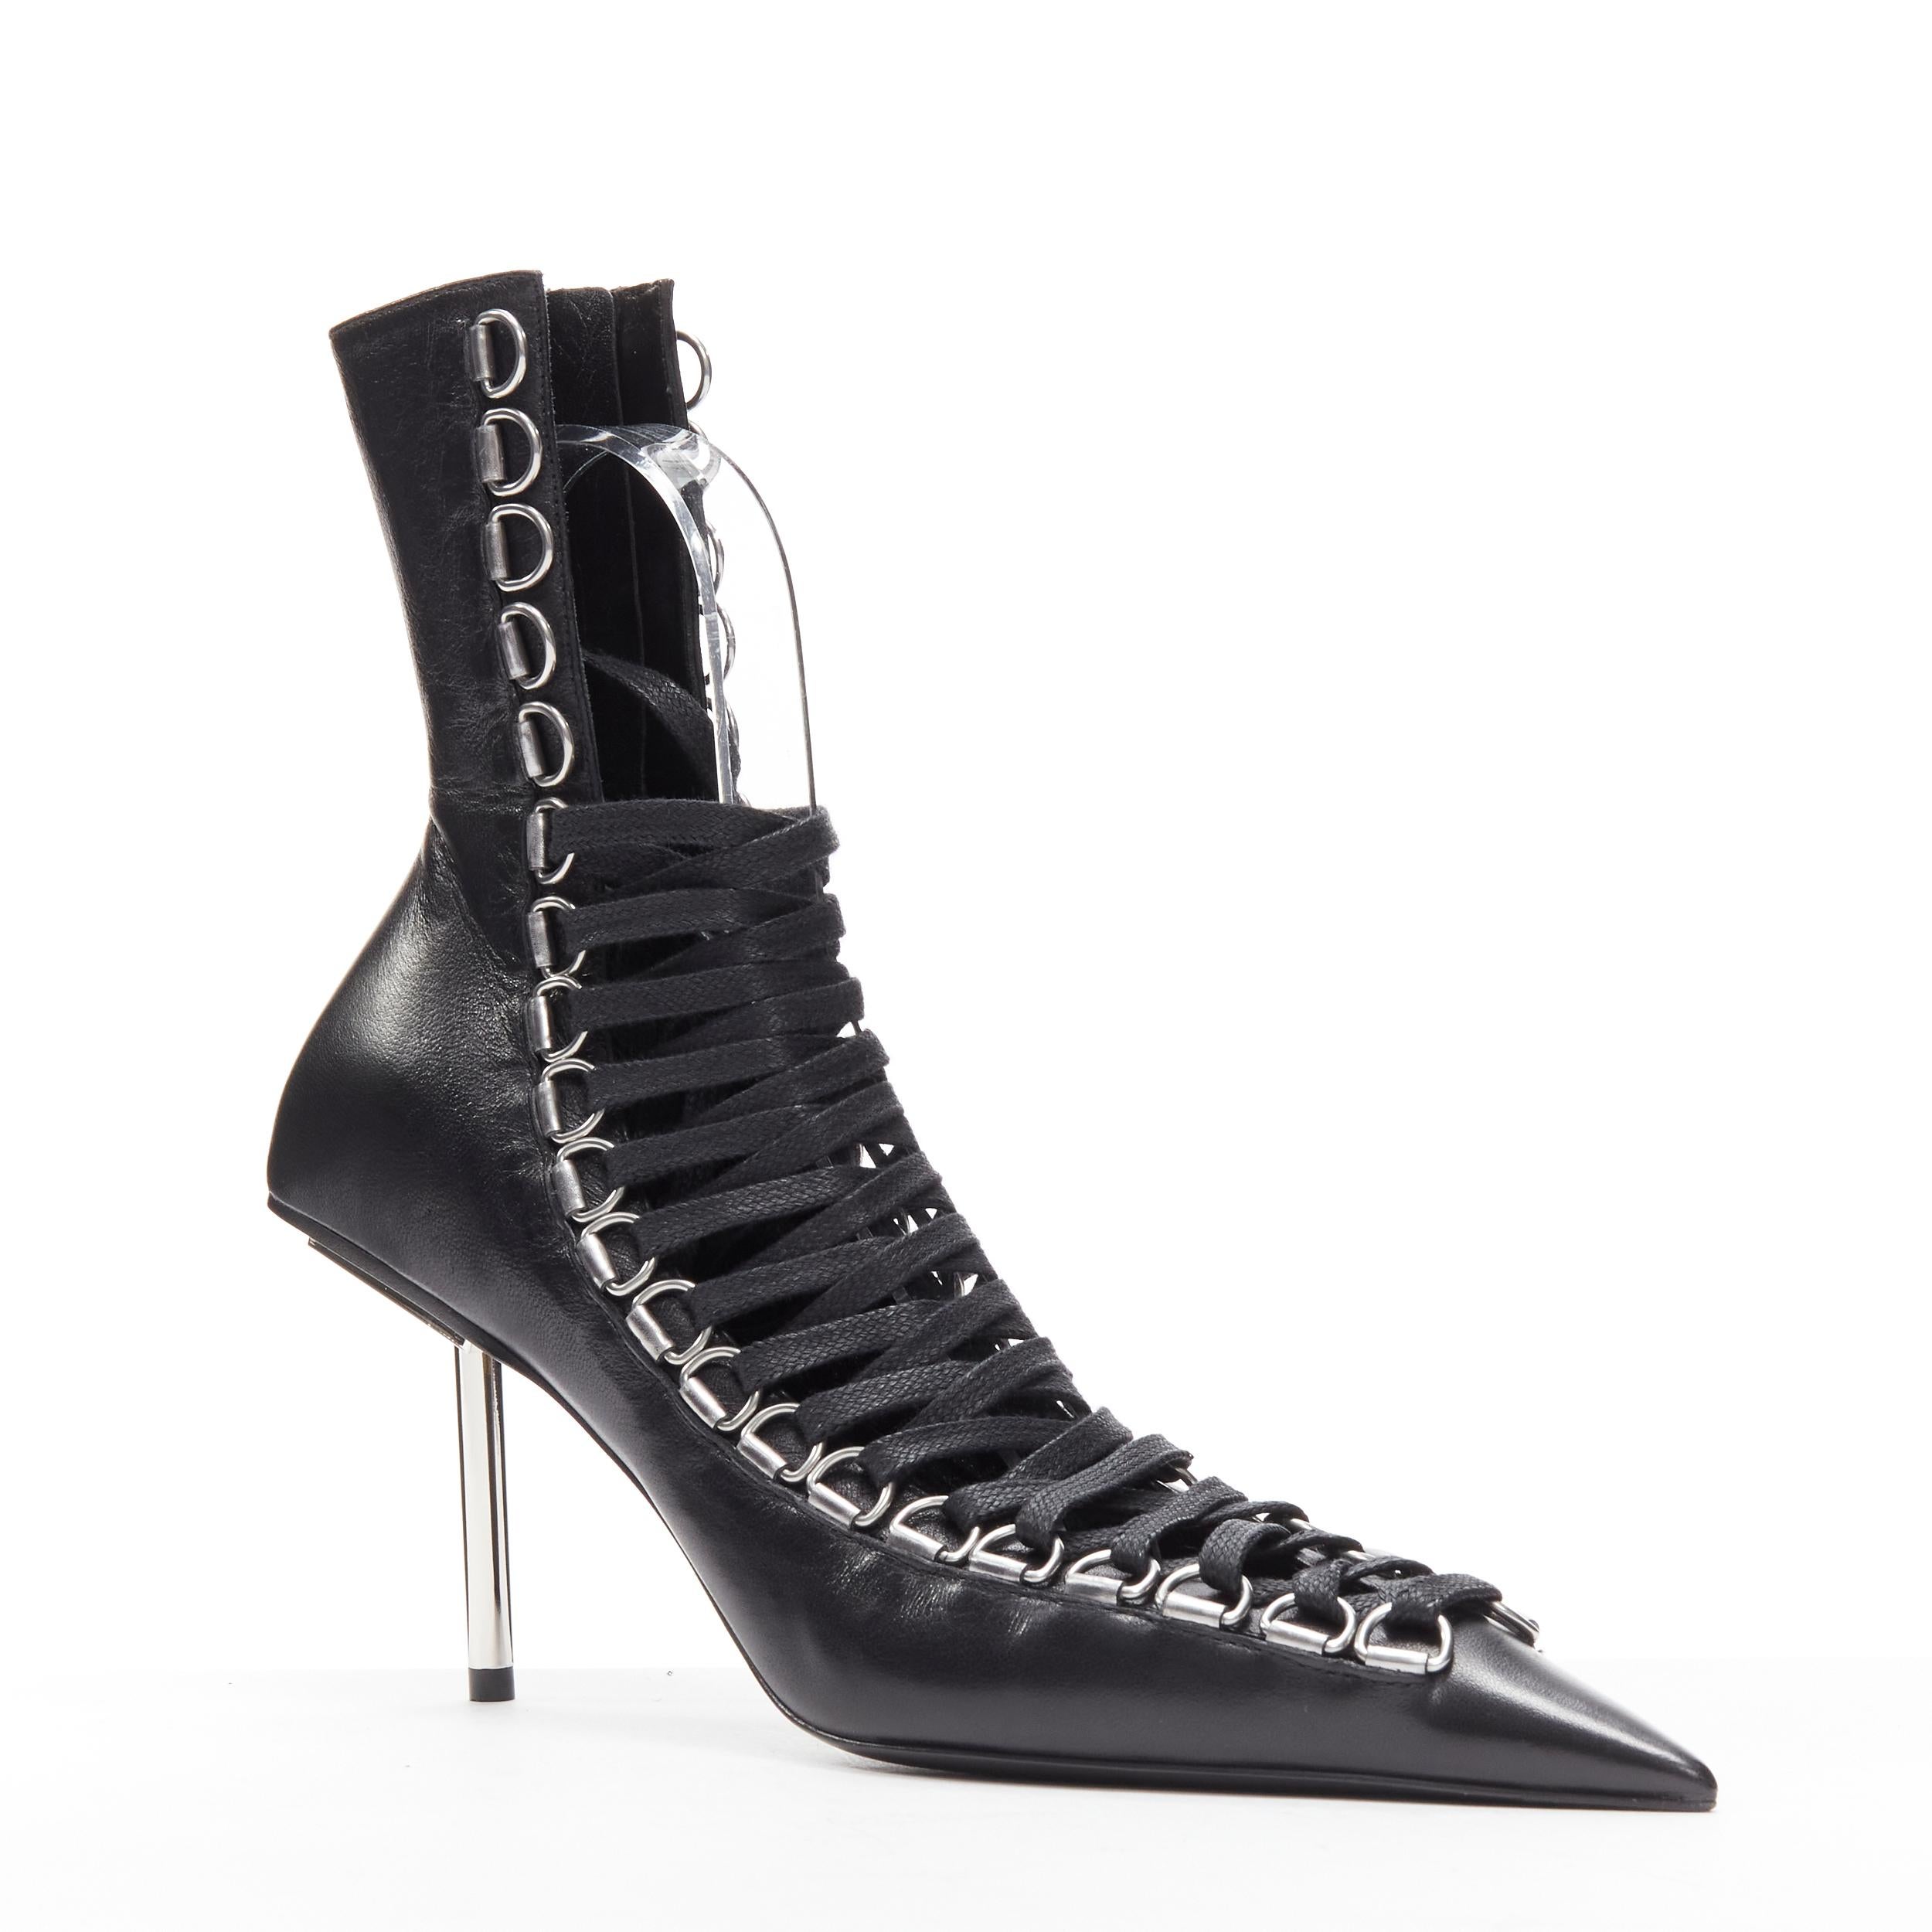 new BALENCIAGA Demna Runway Corset 80 black leather silver metal lace up bootie EU37
Reference: TGAS/D00138
Brand: Balenciaga
Designer: Demna
Model: Corset 80
Material: Leather, Metal
Color: Black, Silver
Pattern: Solid
Closure: Lace Up
Lining: